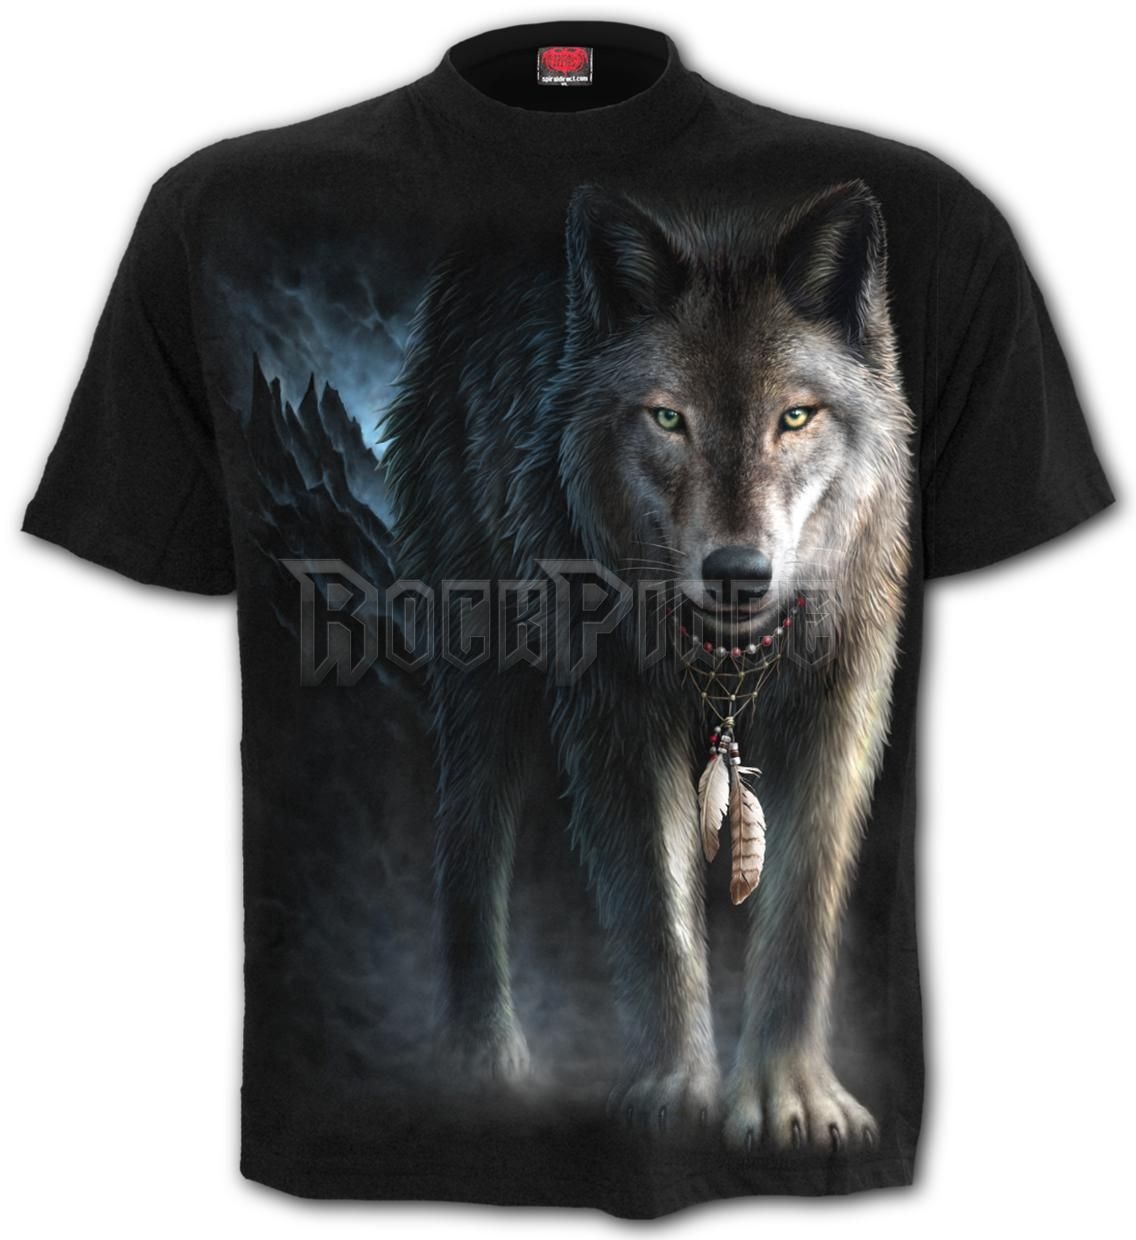 FROM DARKNESS - T-Shirt Black - M034M101